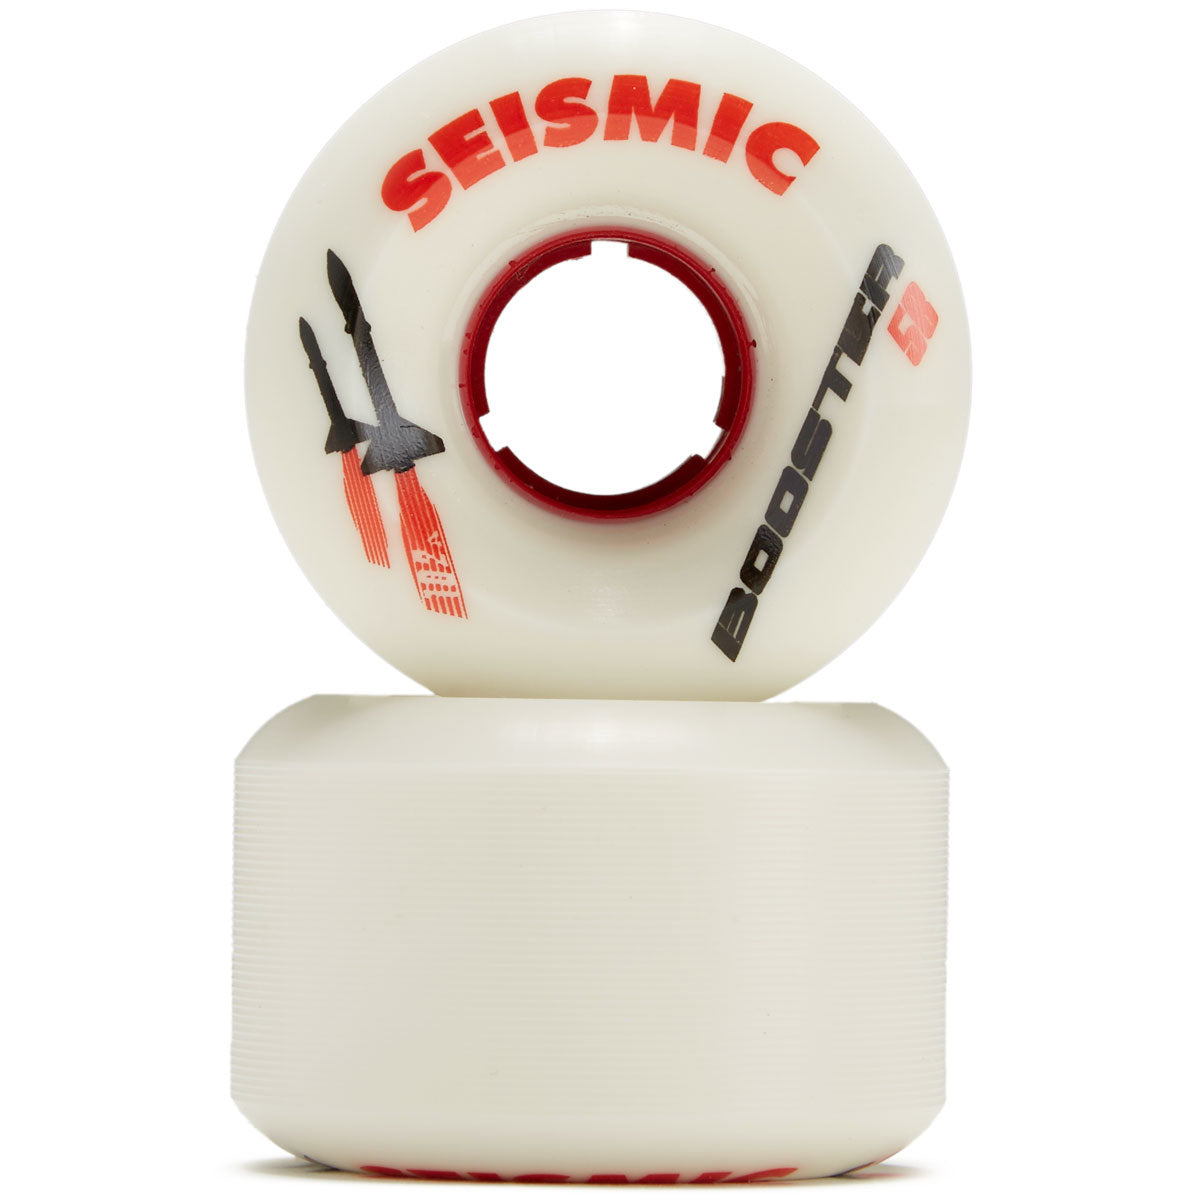 Seismic Booster 102a Longboard Wheels - White/Red - 58mm image 2